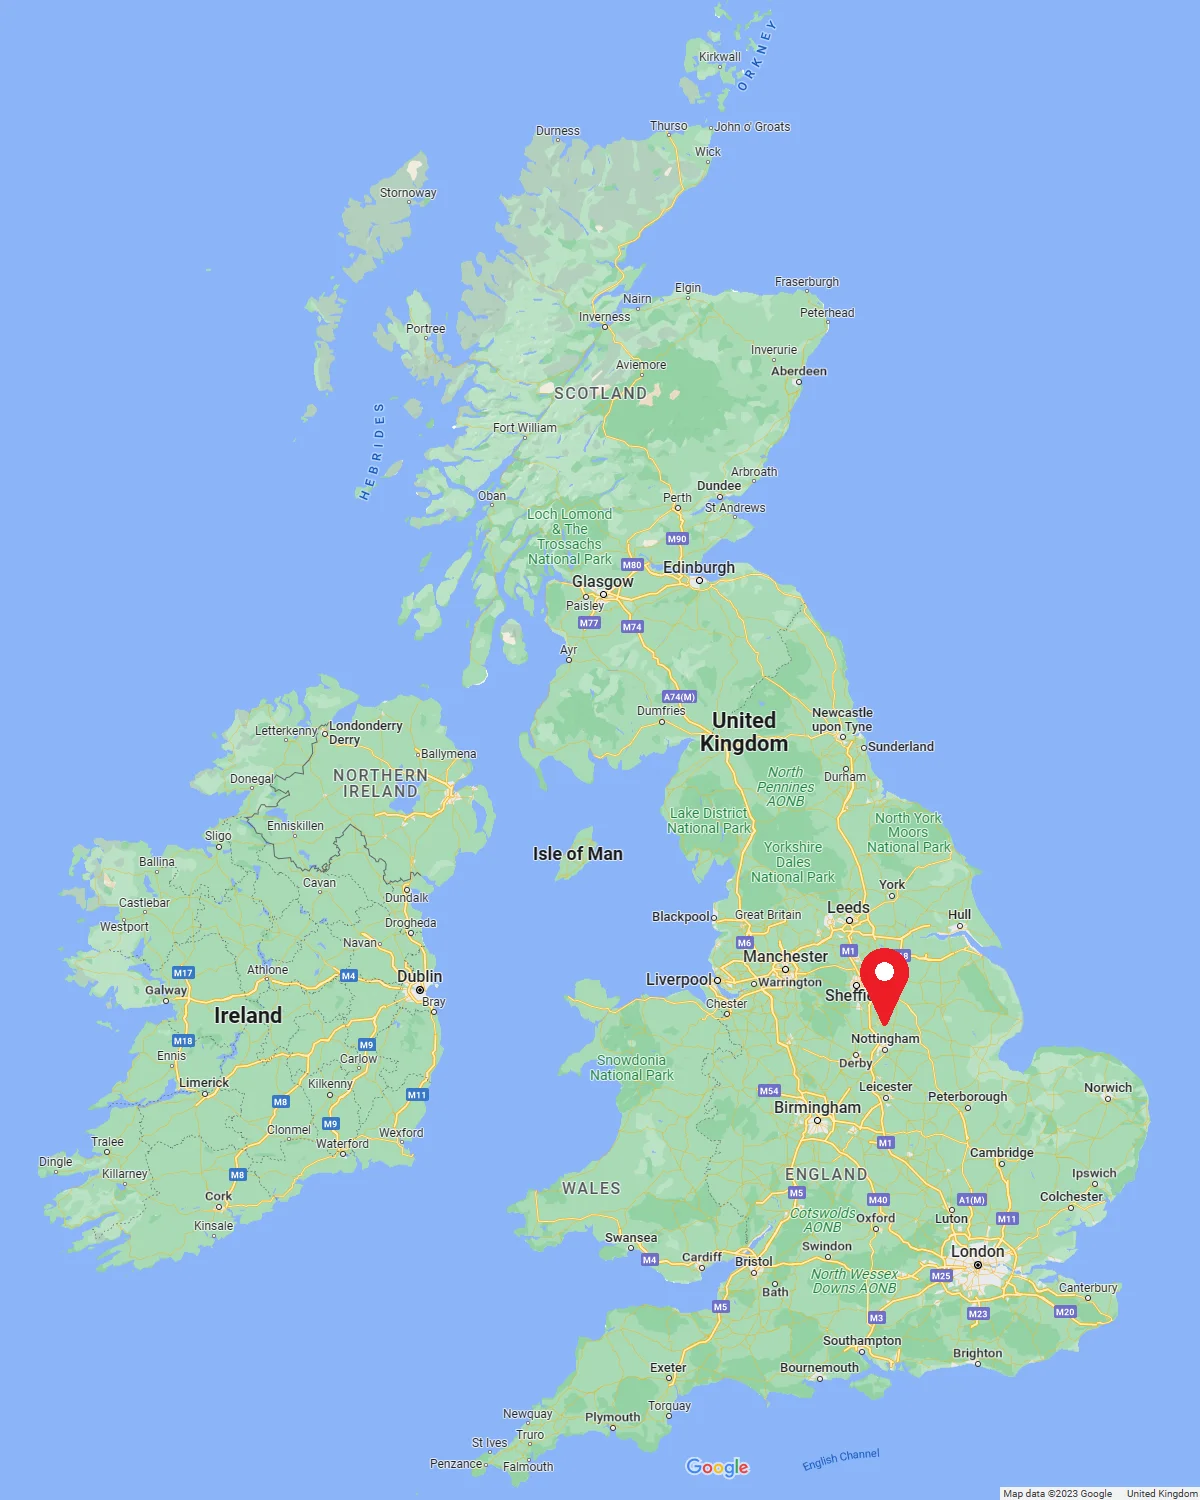 A map of the British Isles with our location highlighted by a red map marker.